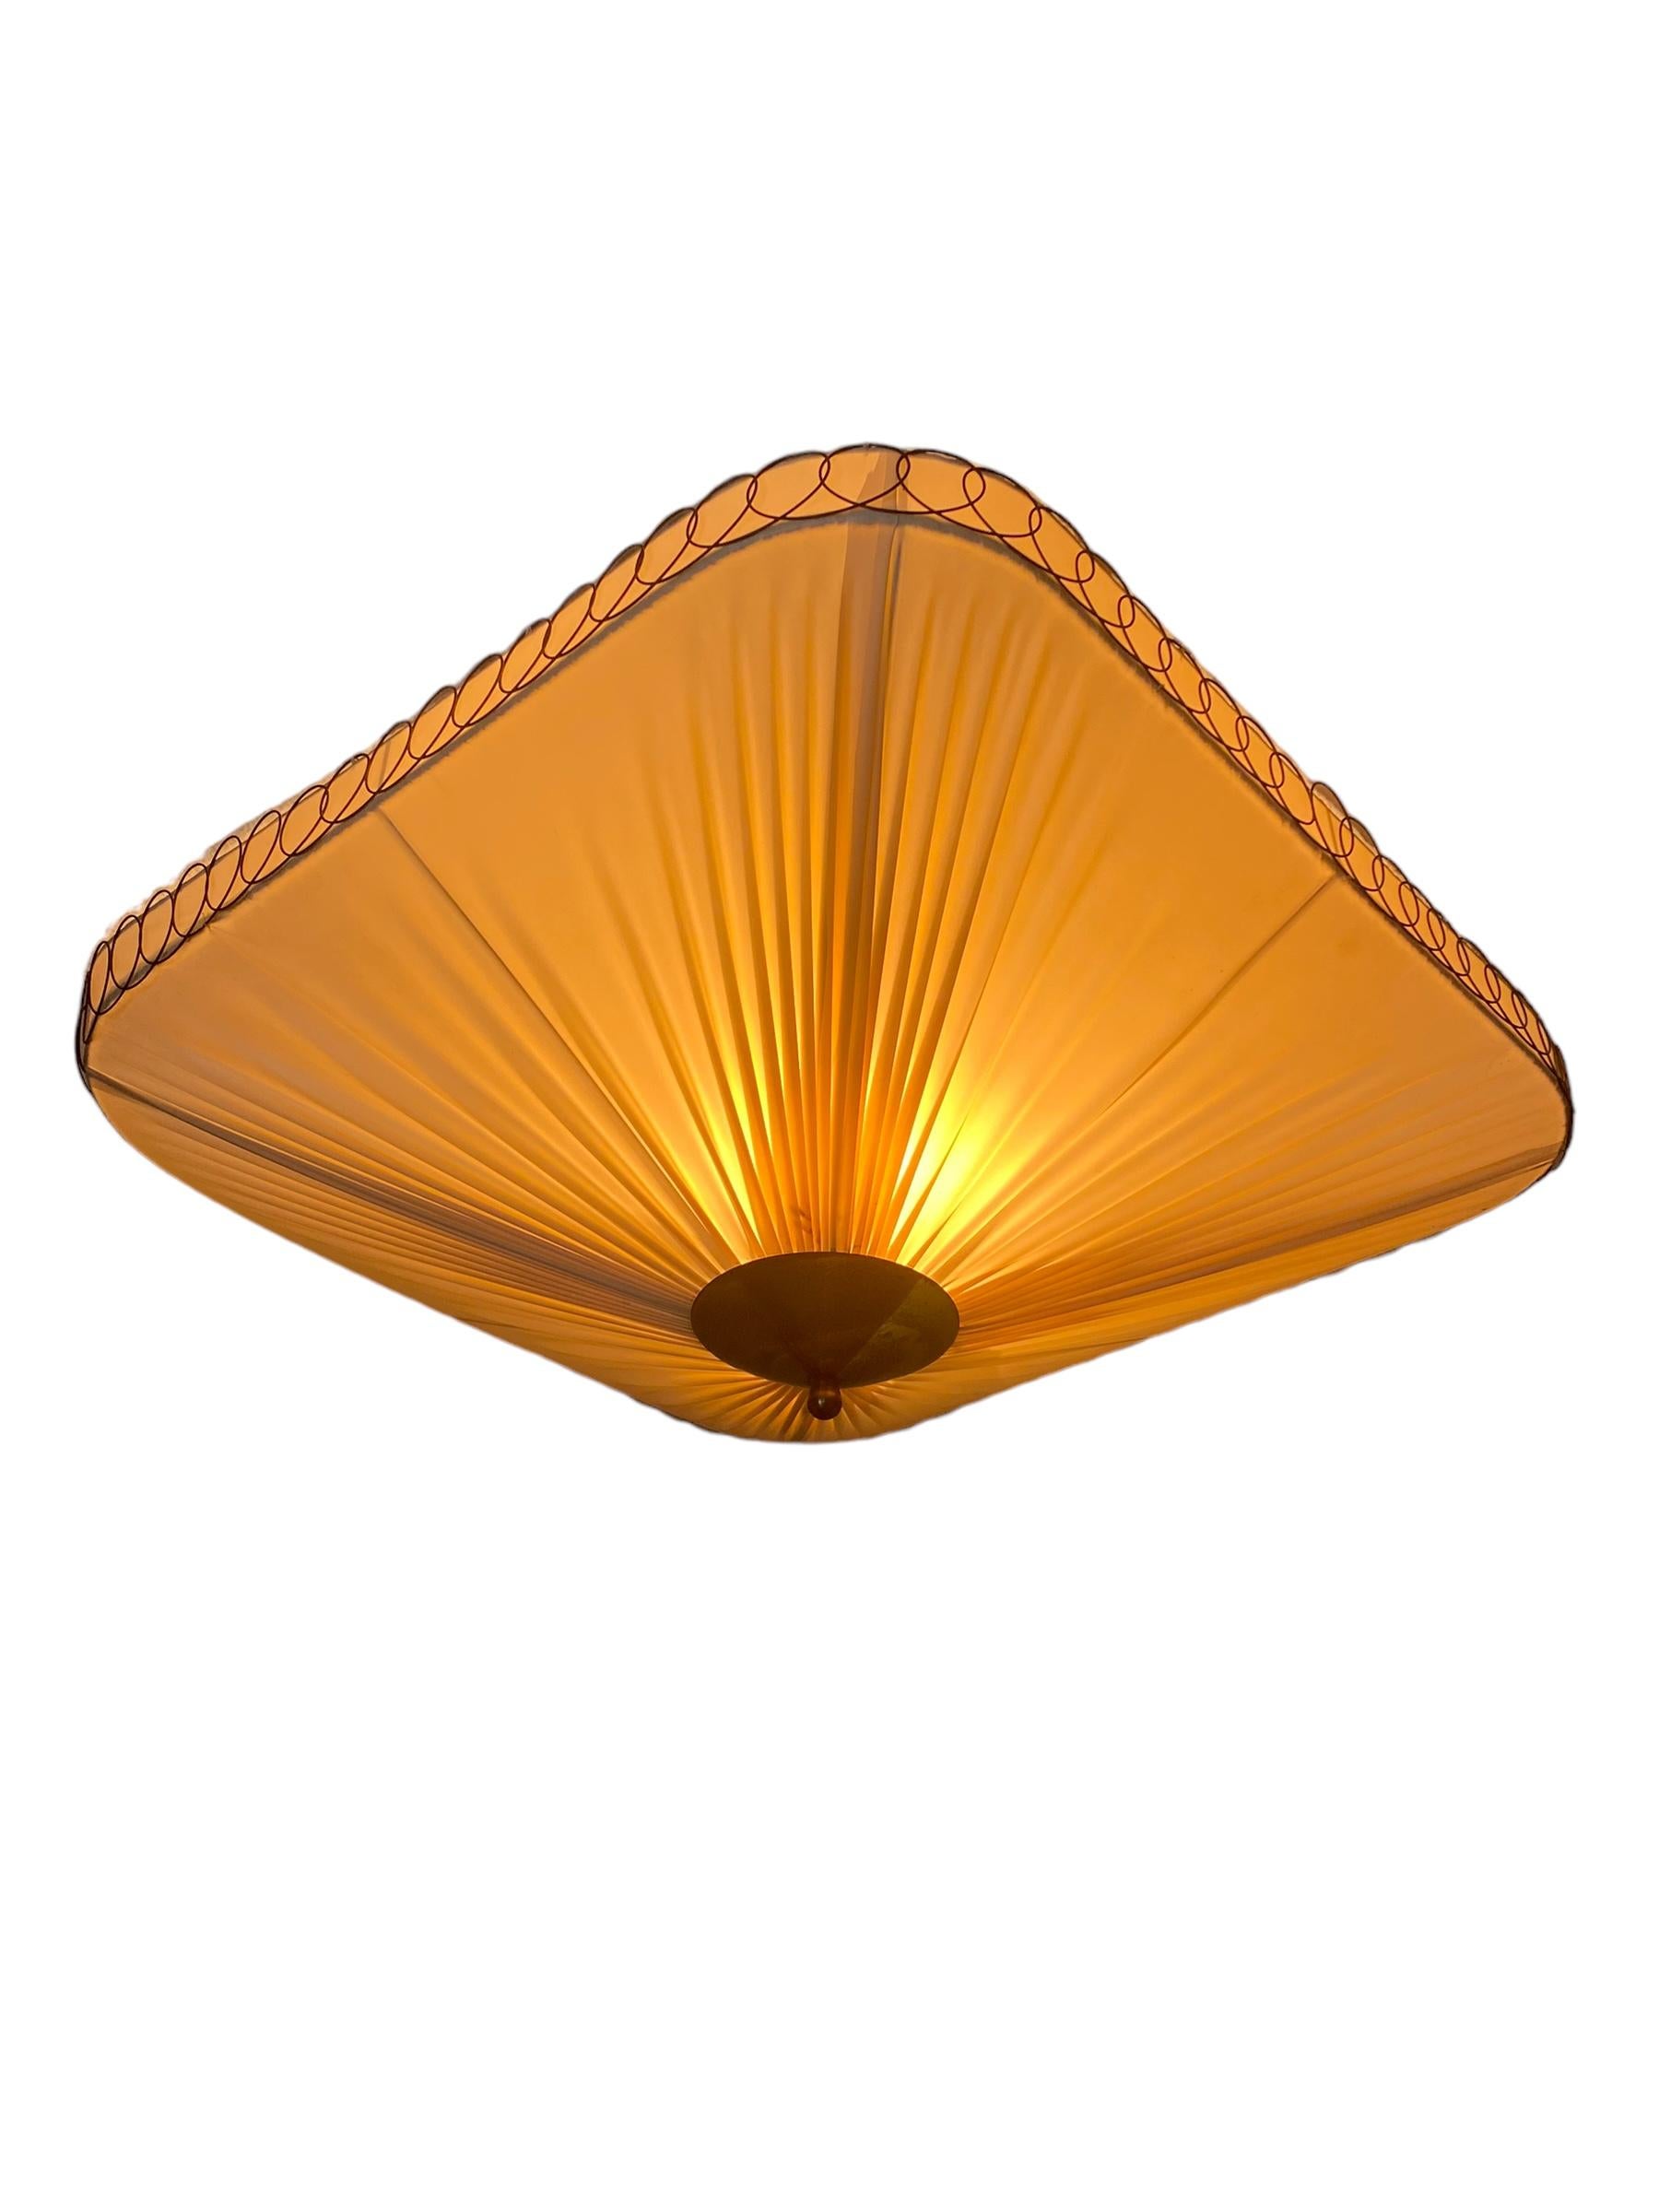 Vintage ceiling lamps like this one were made by different companies in Finland in the 1950s. Itsu along with Taito, Idman and Orno were some of the leading lighting manufacturers in mid century Finland. This lamp is very difficult to attribute to a